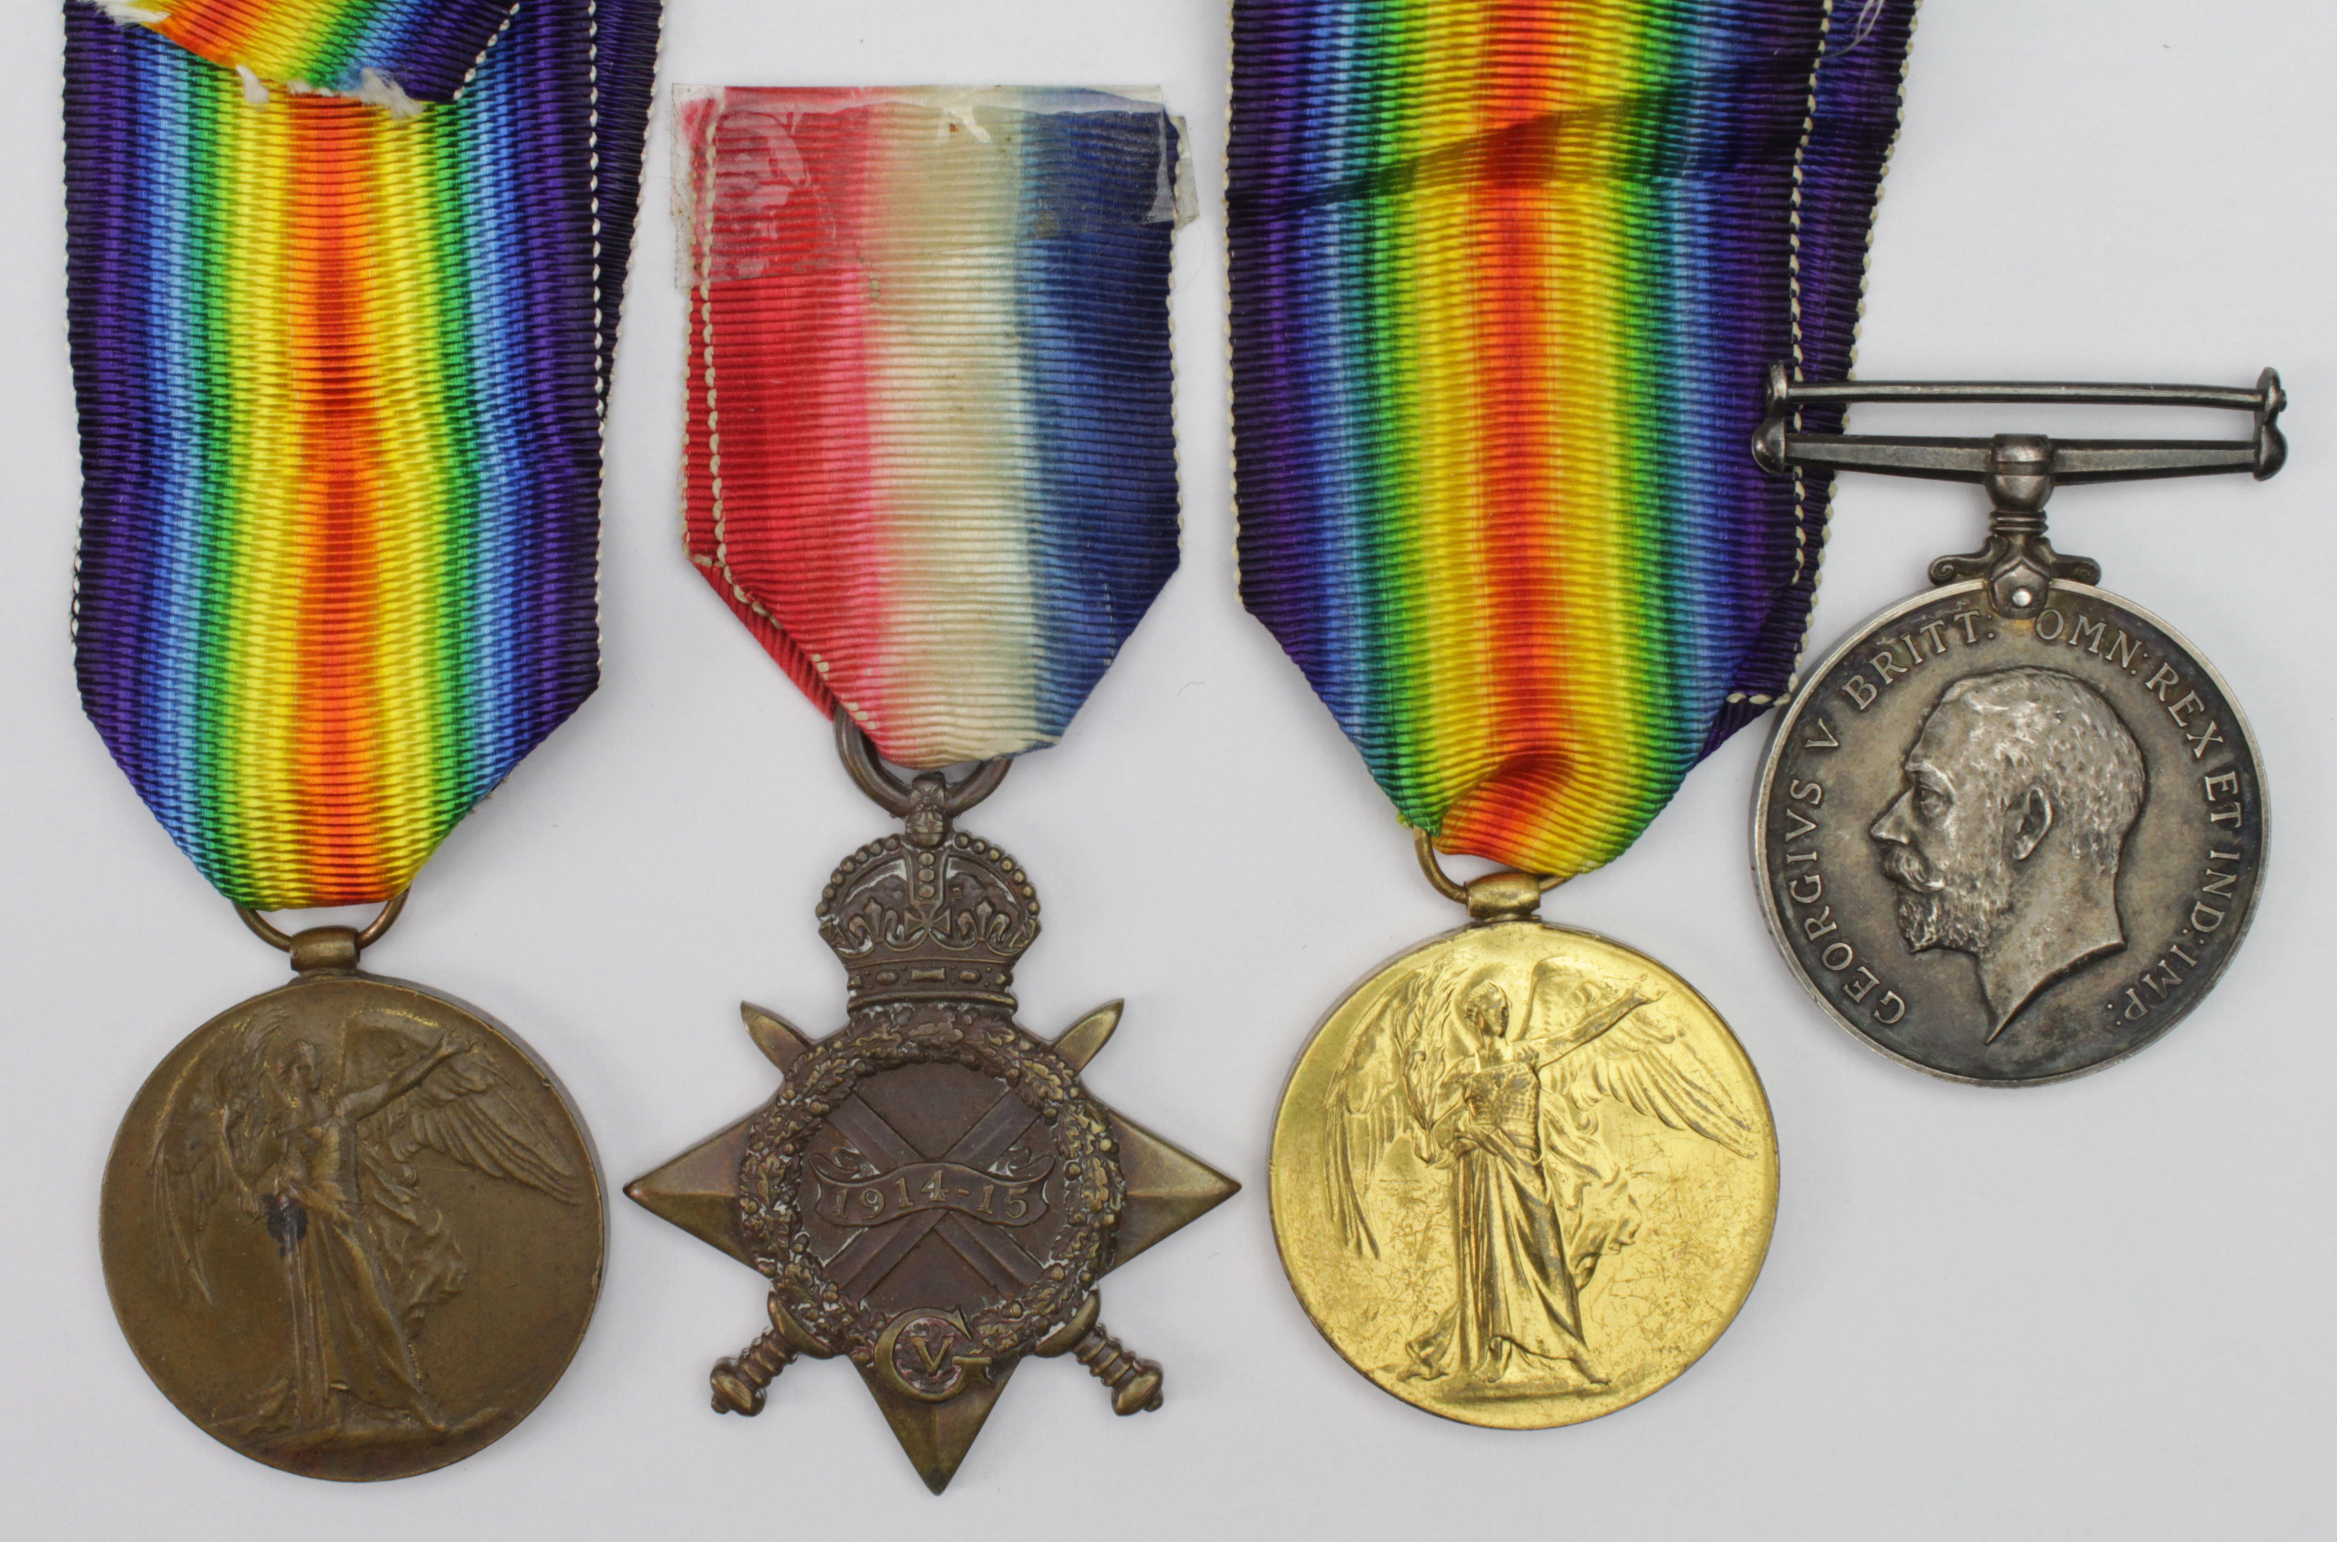 WW1 medals - 1915 Star to SS.112320 W Thorn STO.1.RN., BWM to 153175 Pte W Lashbrook RAMC, Victory